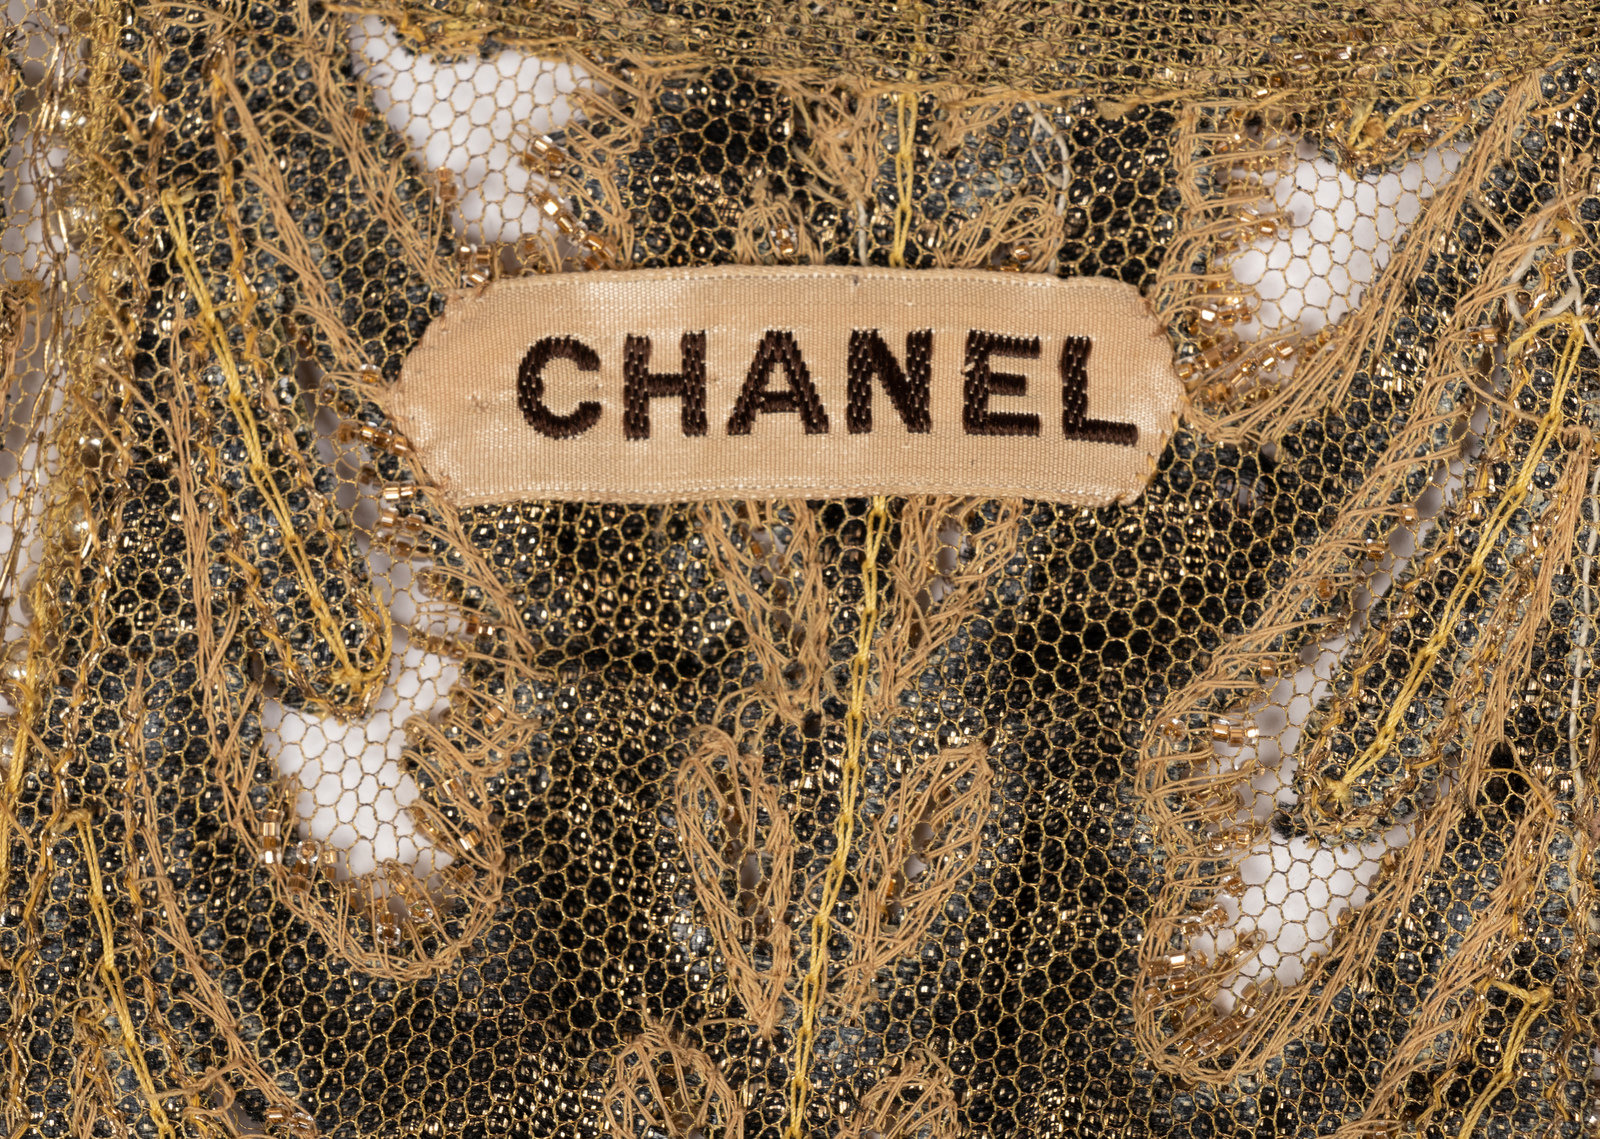 Sticker. Chanel embroidered logo with many patterns